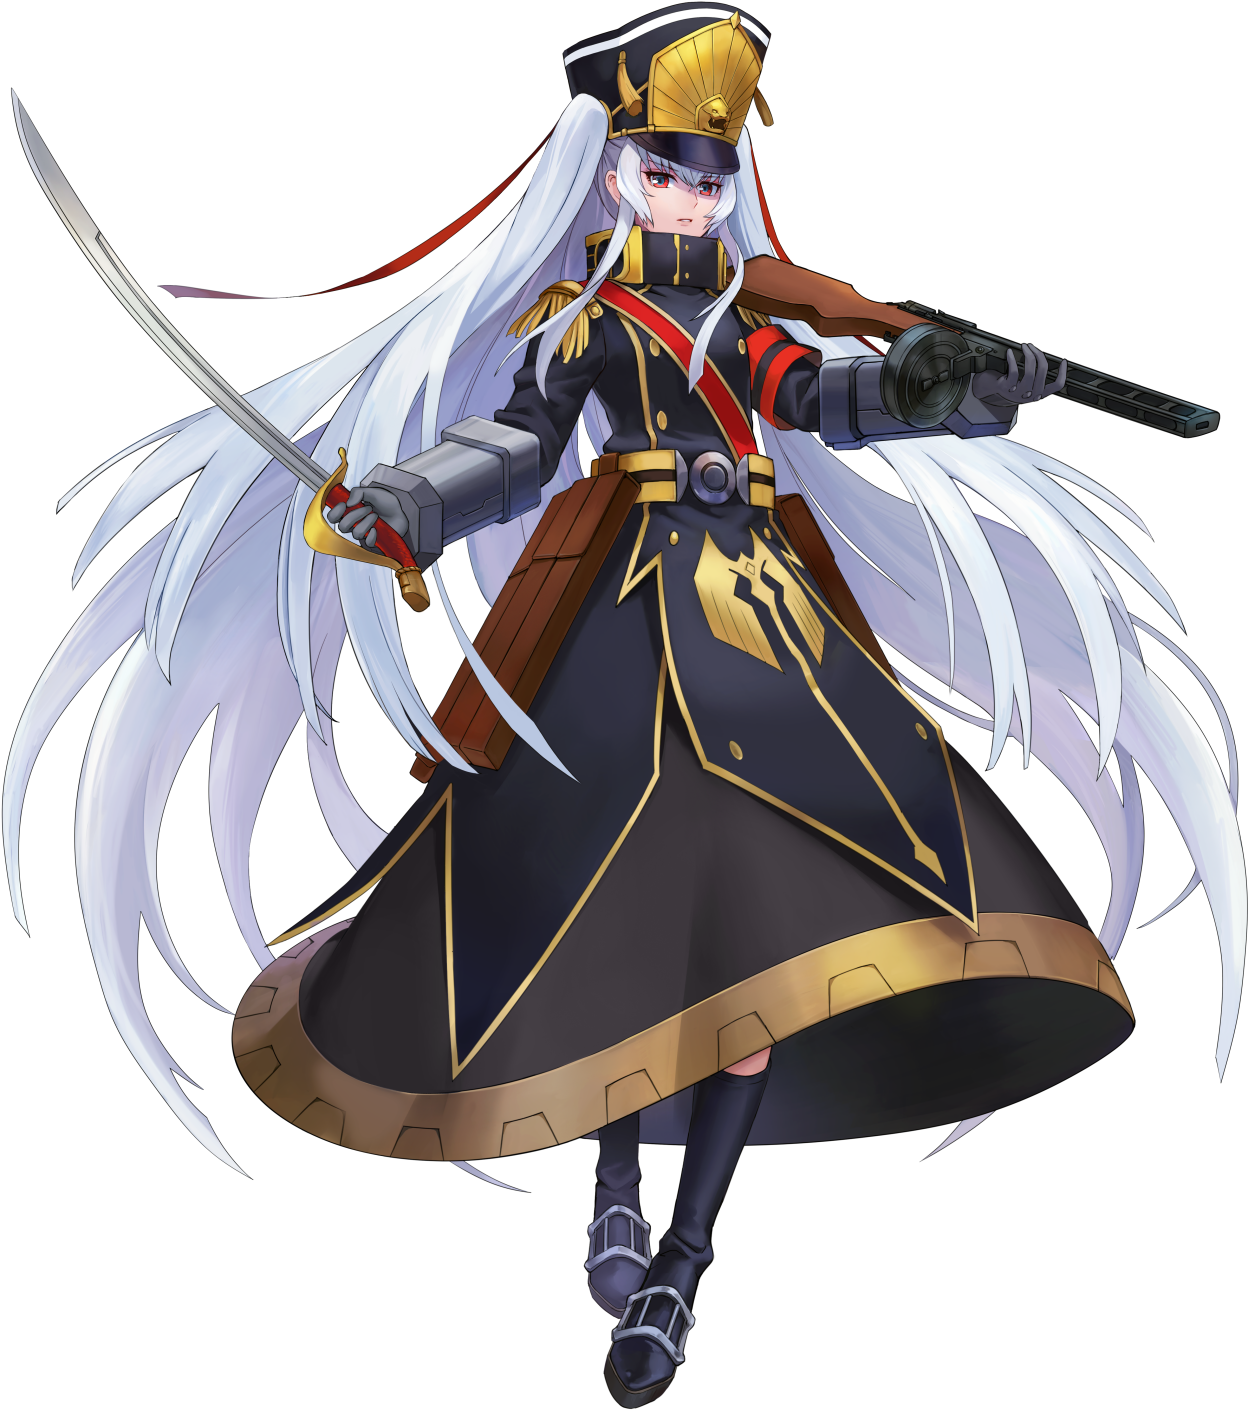 Download Png - Altair Re Creators Png Clipart, free png download.